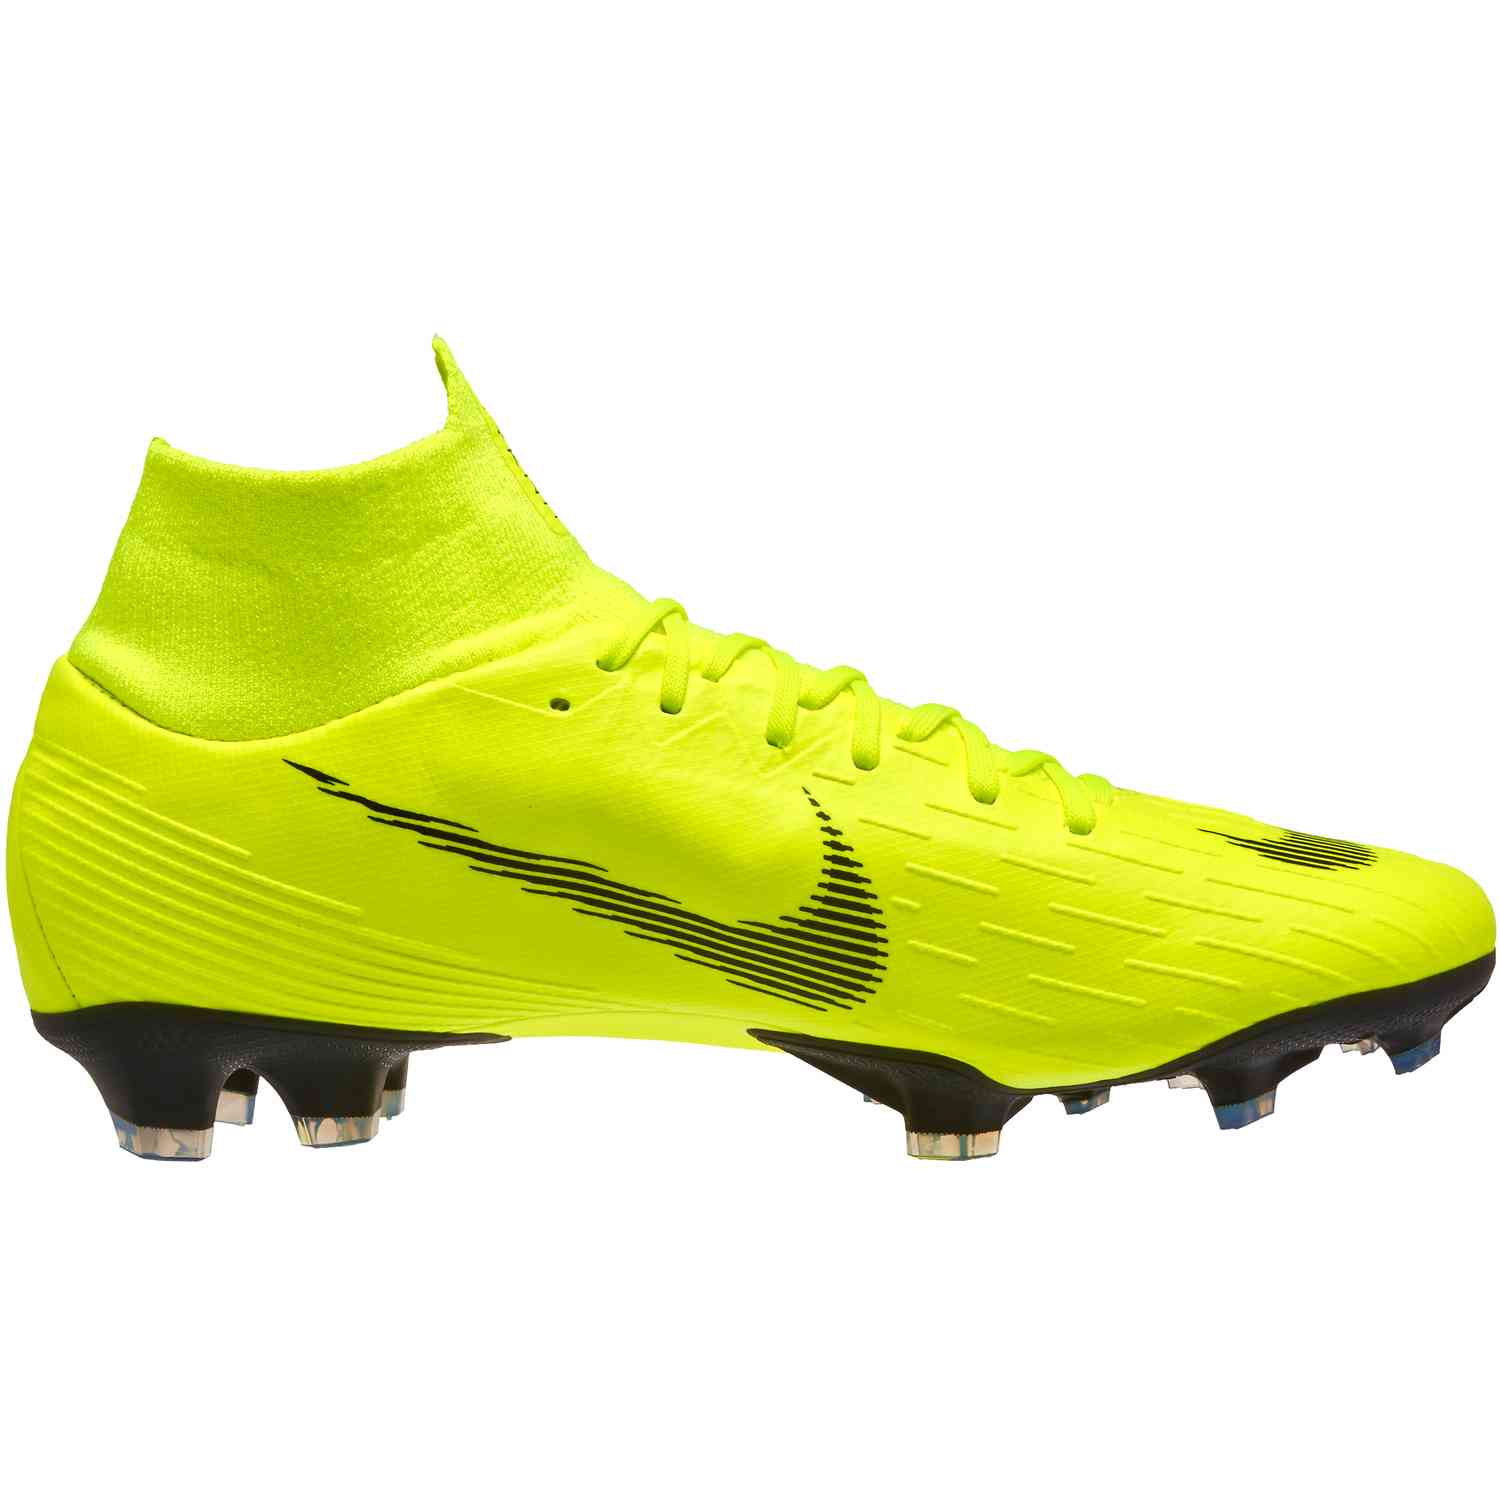 Nike Mercurial Superfly Produkte Online Shop Outlet.